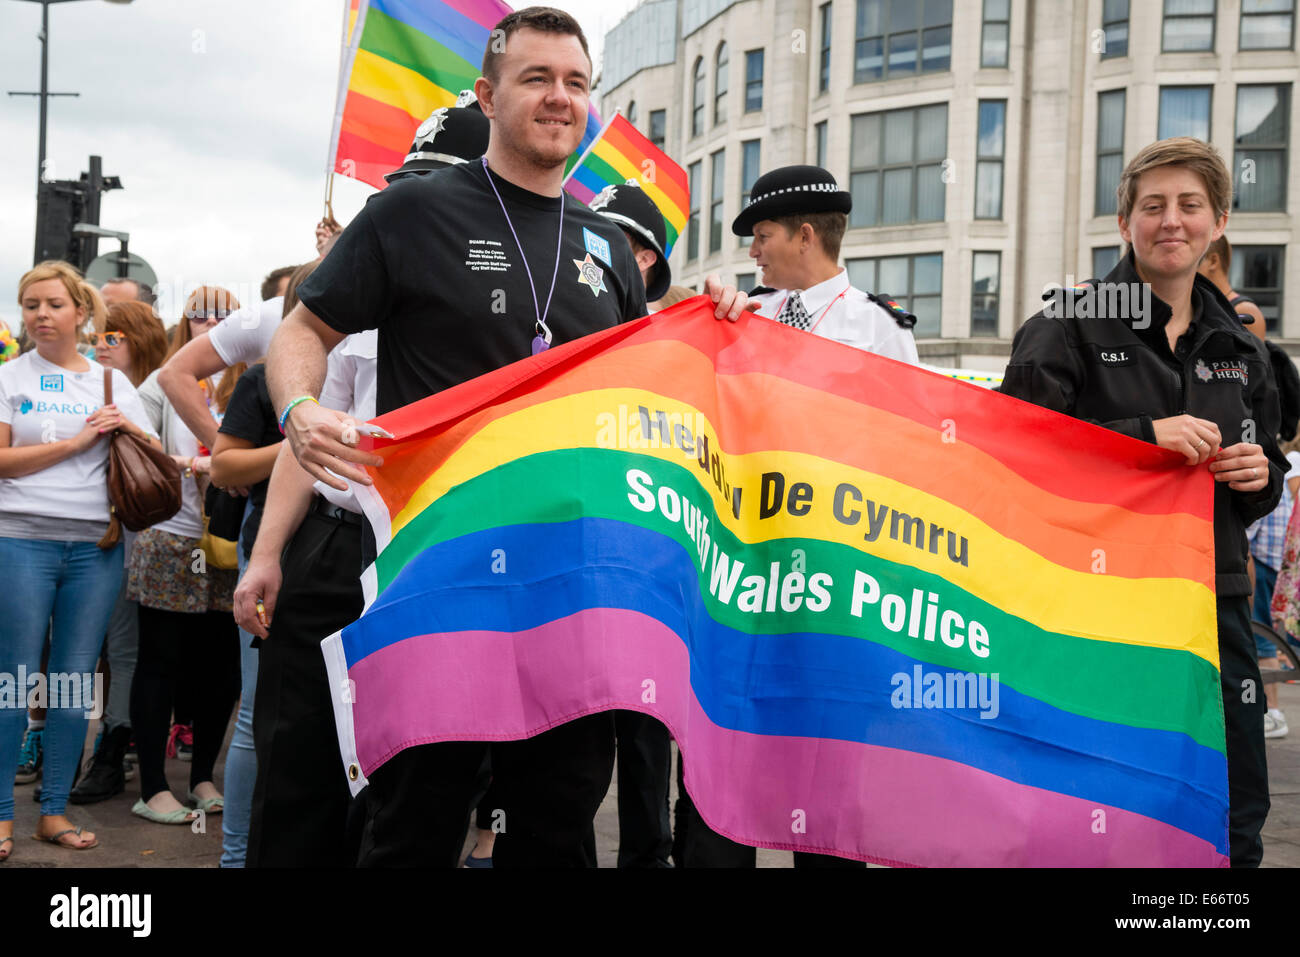 Cardiff, Wales, UK. 16. August 2014. Die 2014 stolz Cymru LGBT parade Karneval in Cardiff South Wales Police Credit: Robert Convery/Alamy Live News Stockfoto